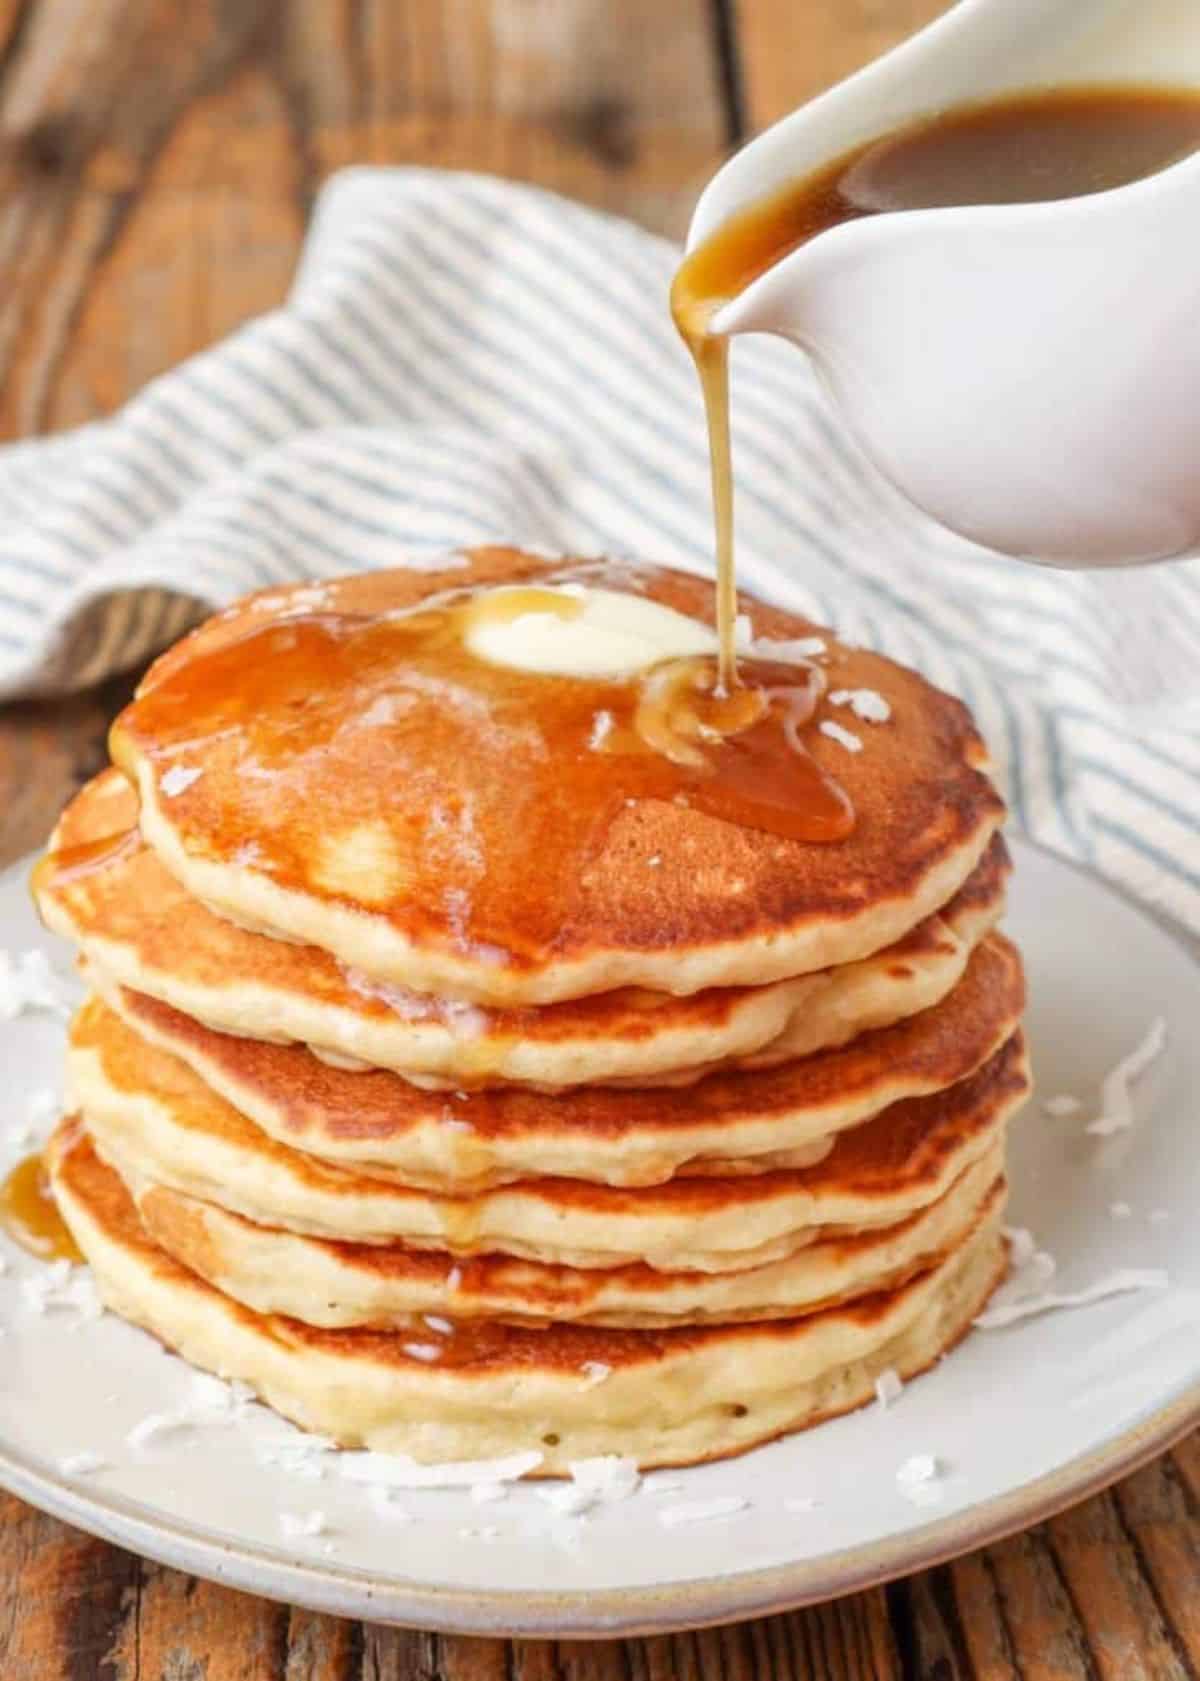 Brown Sugar Butter Syrup poured on a pile of pancakes.